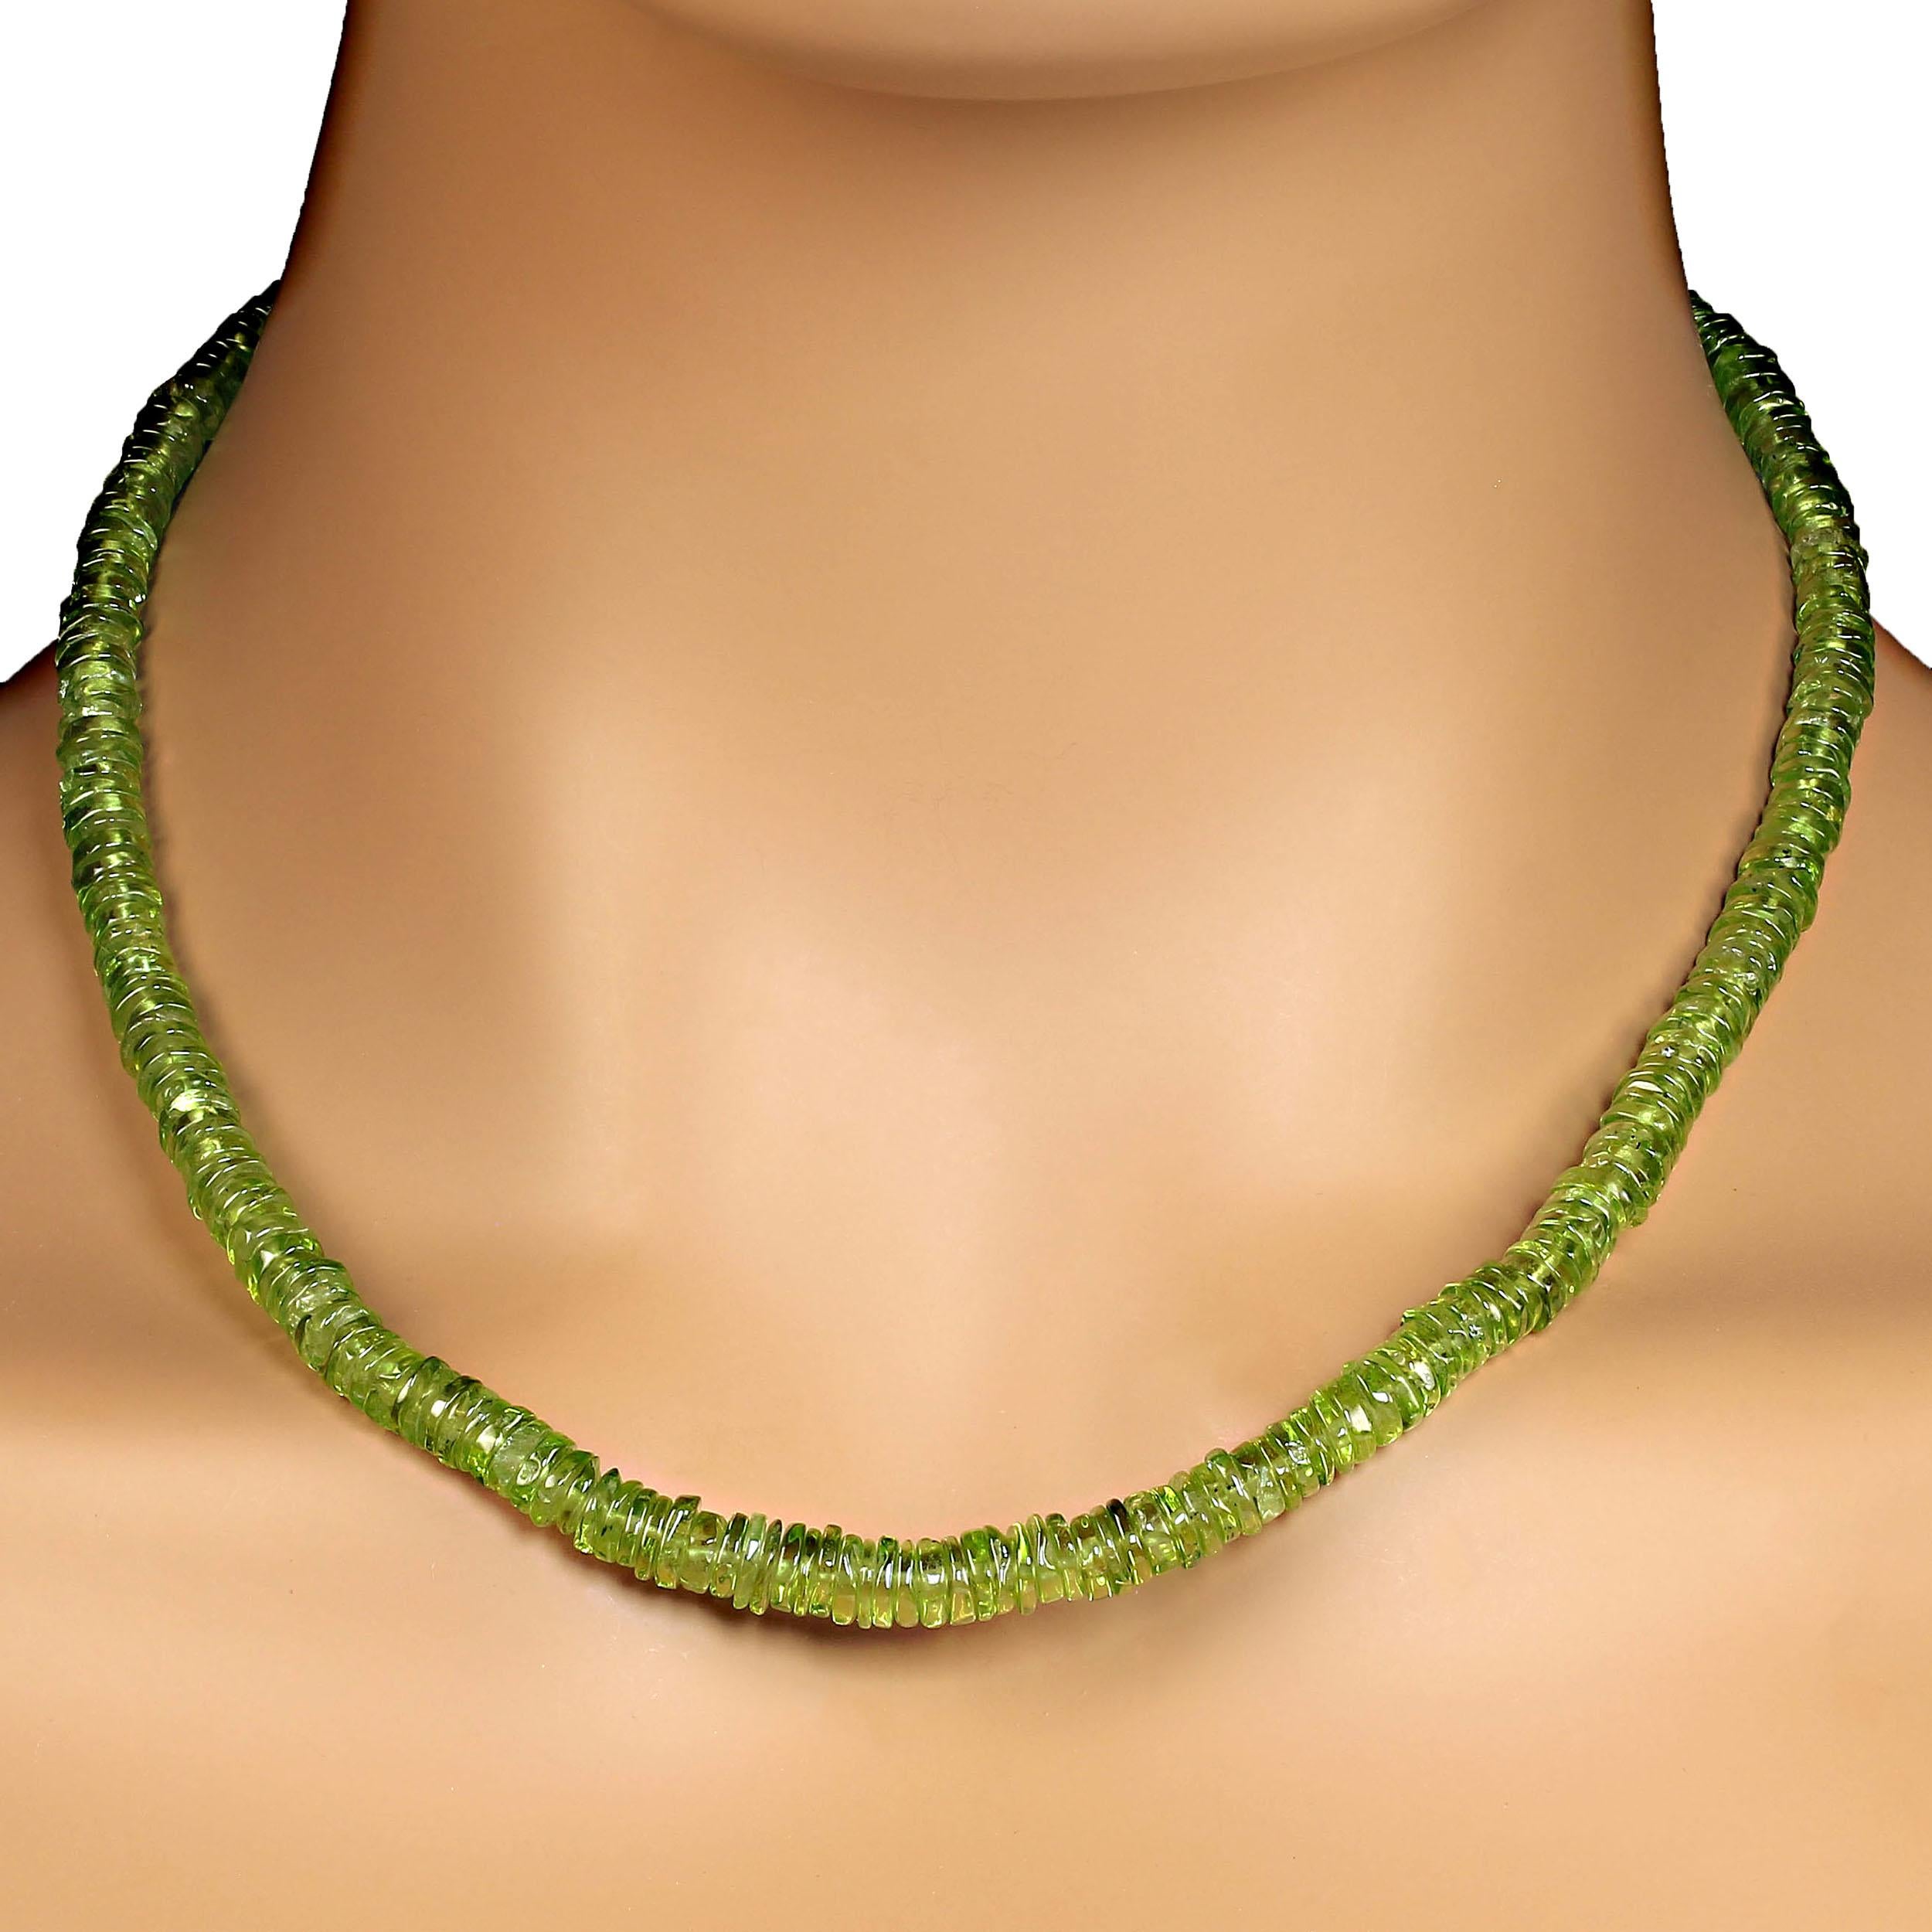 Artisan AJD 16 Inch Polished Peridot Rondelles Choker necklace  Perfect Gift! For Sale